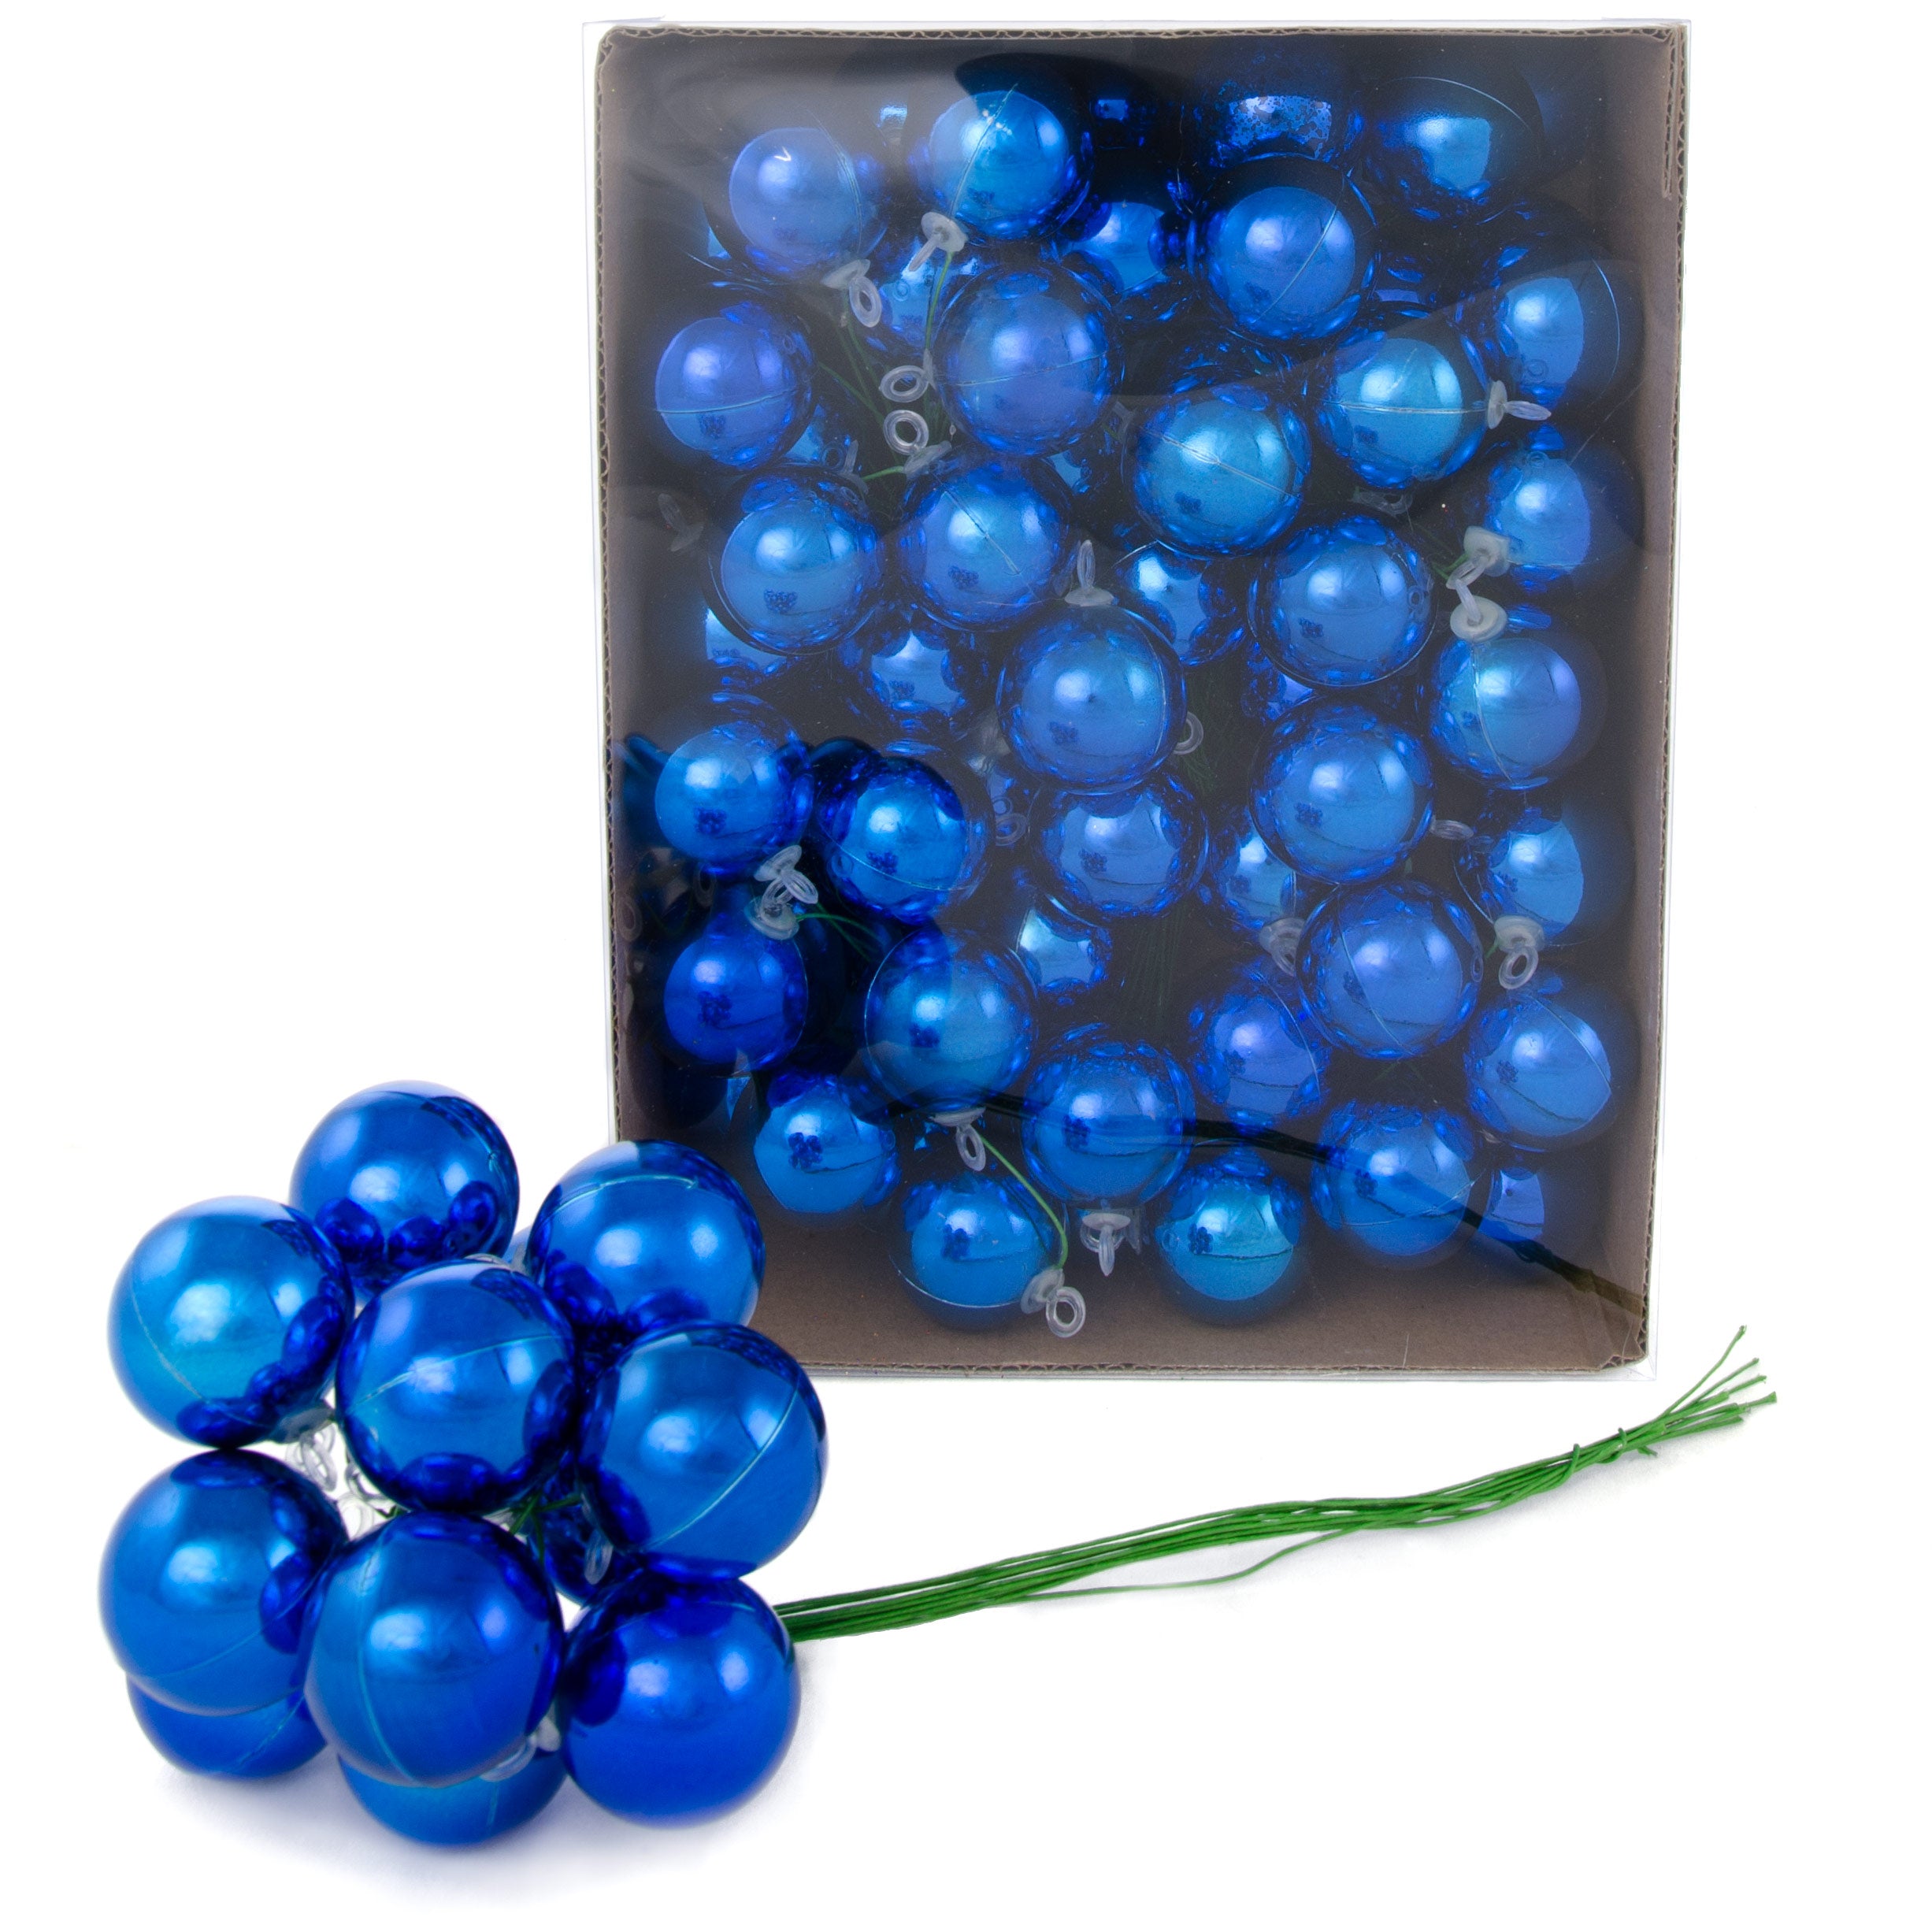 30MM Metallic Ball Ornament On Wire: Royal Blue (72)